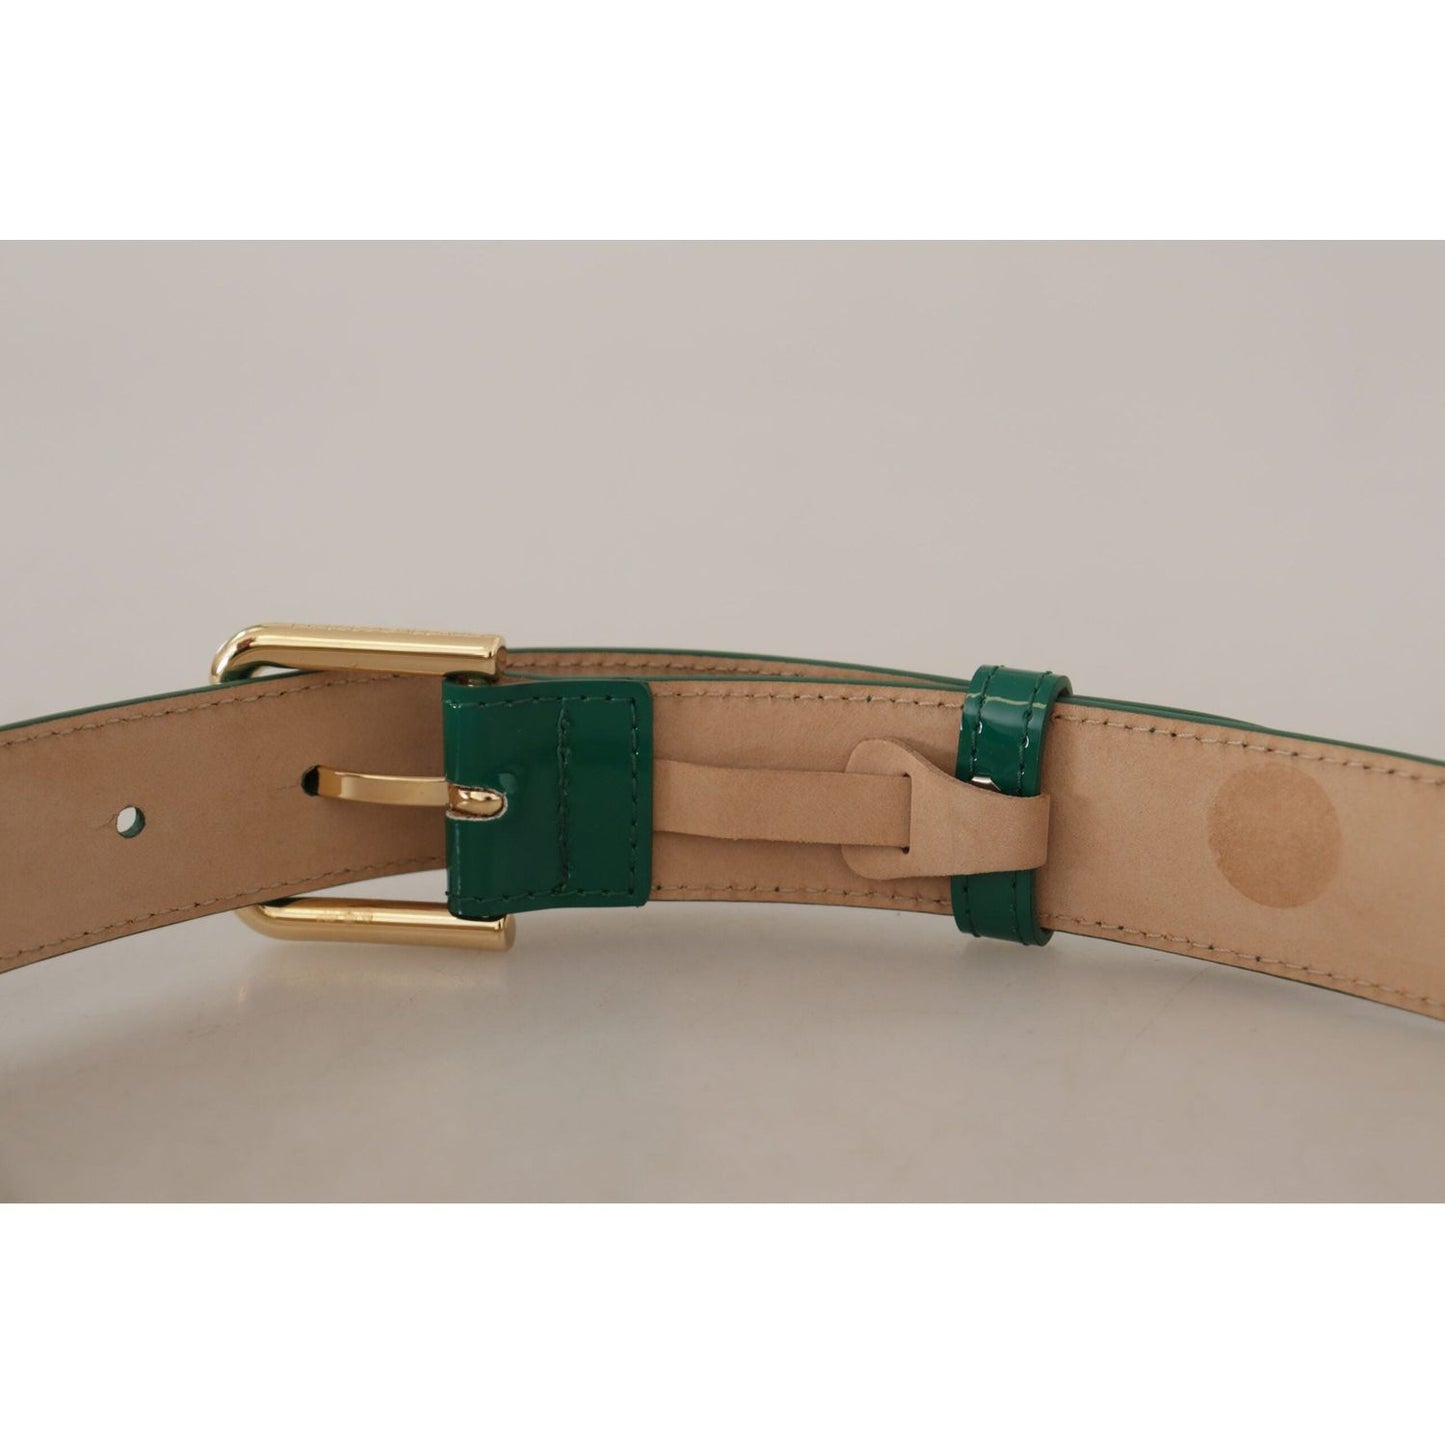 Dolce & Gabbana Elegant Green Leather Belt with Gold Buckle Detail green-patent-leather-logo-engraved-buckle-belt IMG_8010-1-scaled-6011ffec-102.jpg